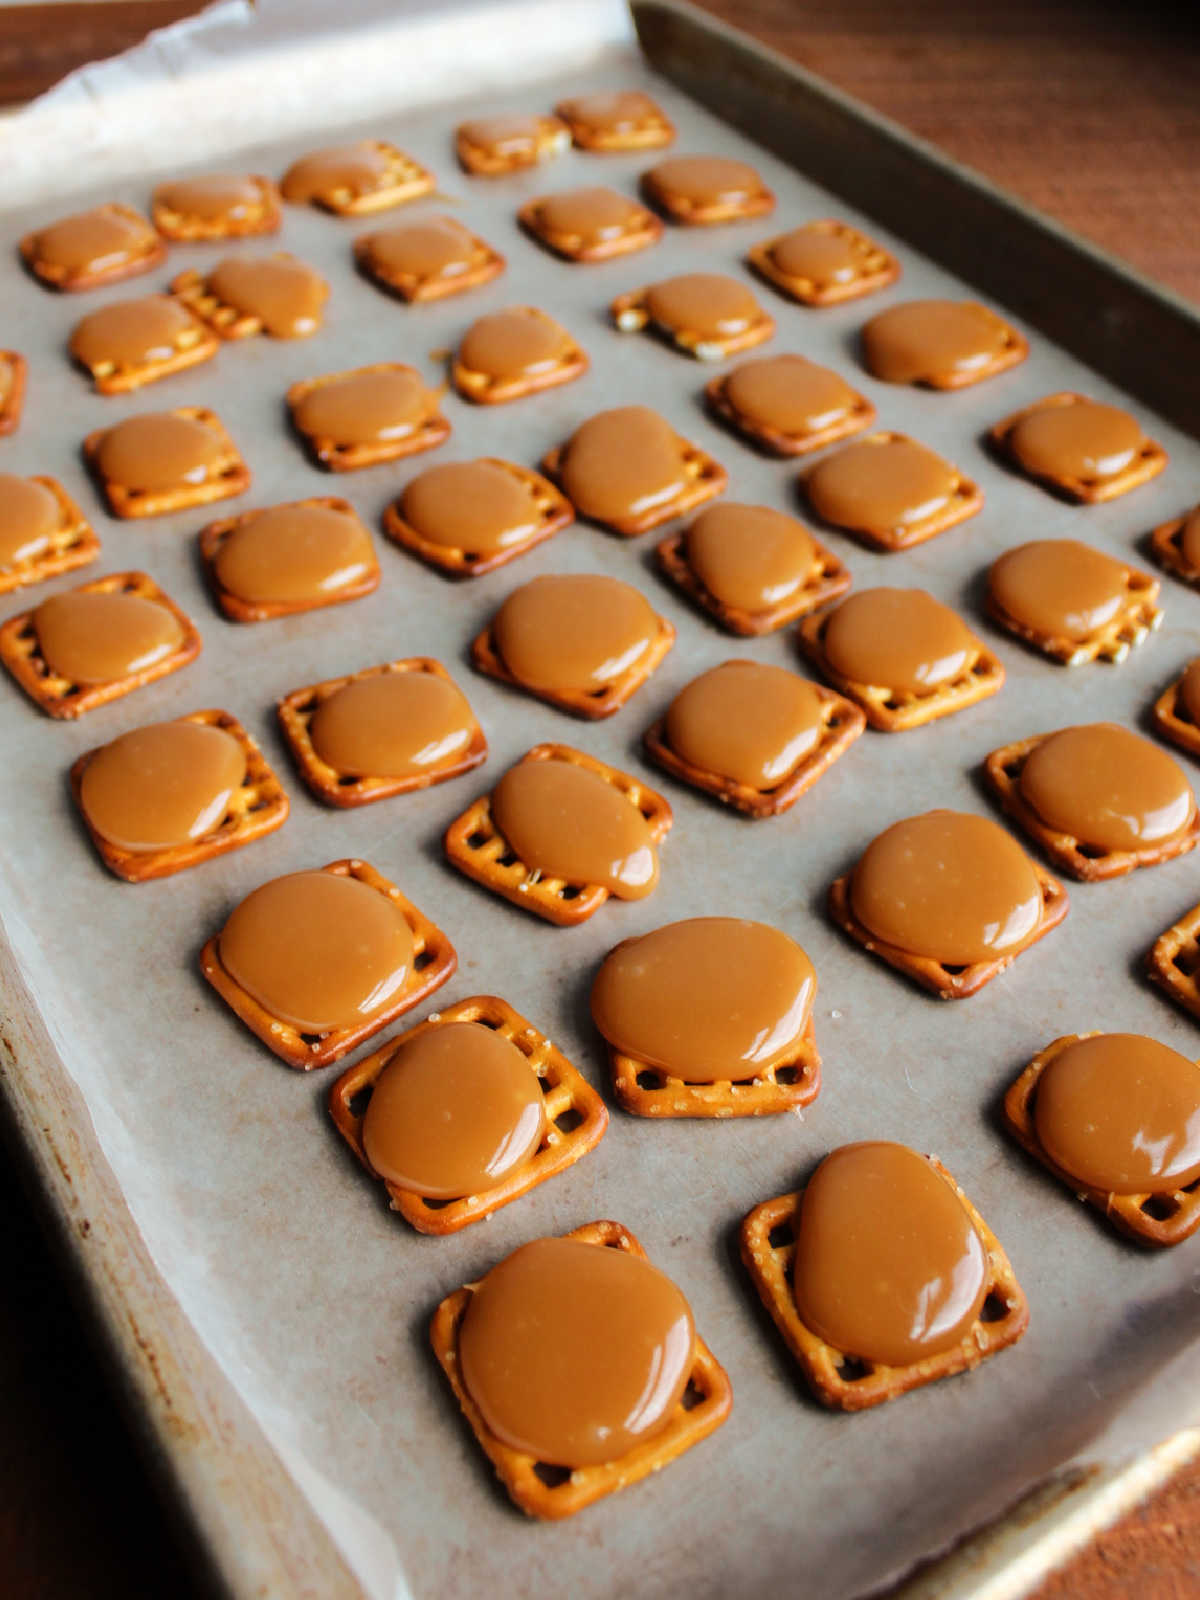 Tray of square pretzels topped with gooey caramel, waiting for chocolate.